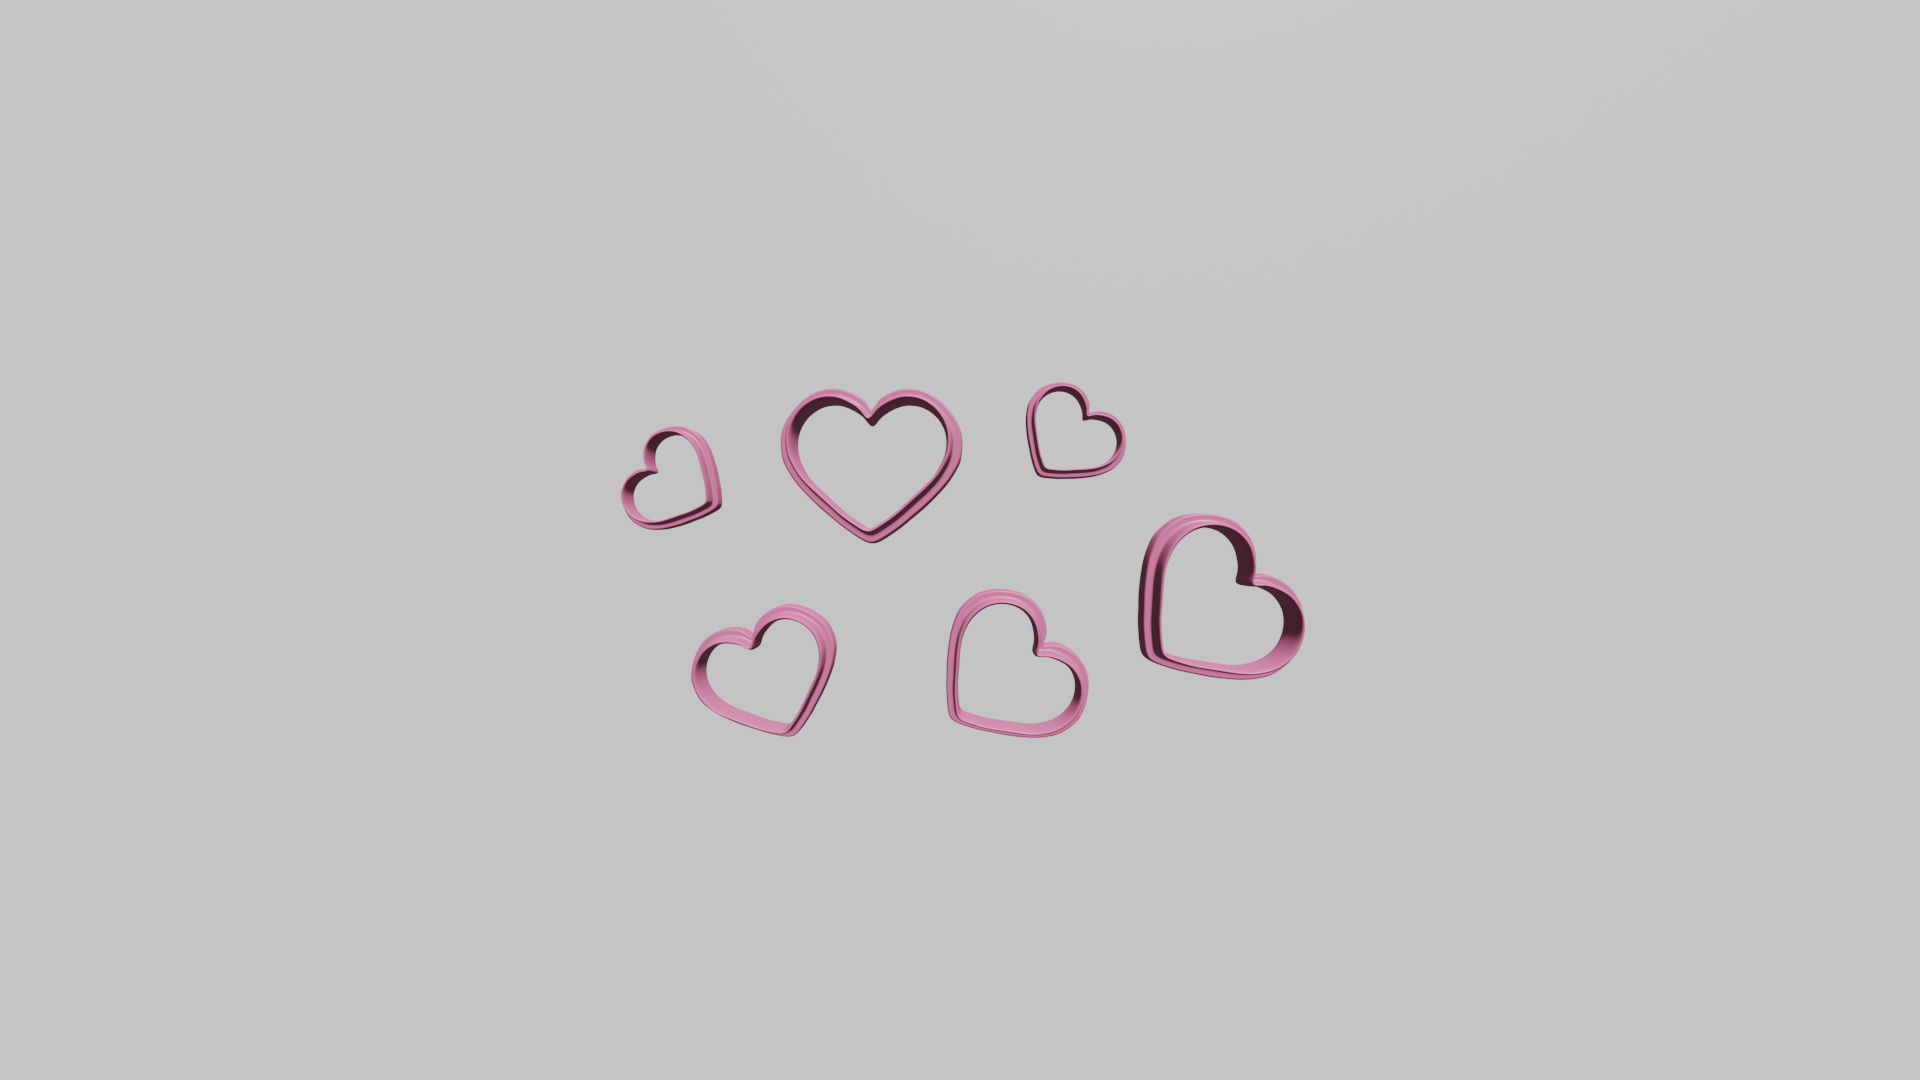 cora.png Download STL file polymeric clay cutter - hearts • 3D printer object, CristinaUY